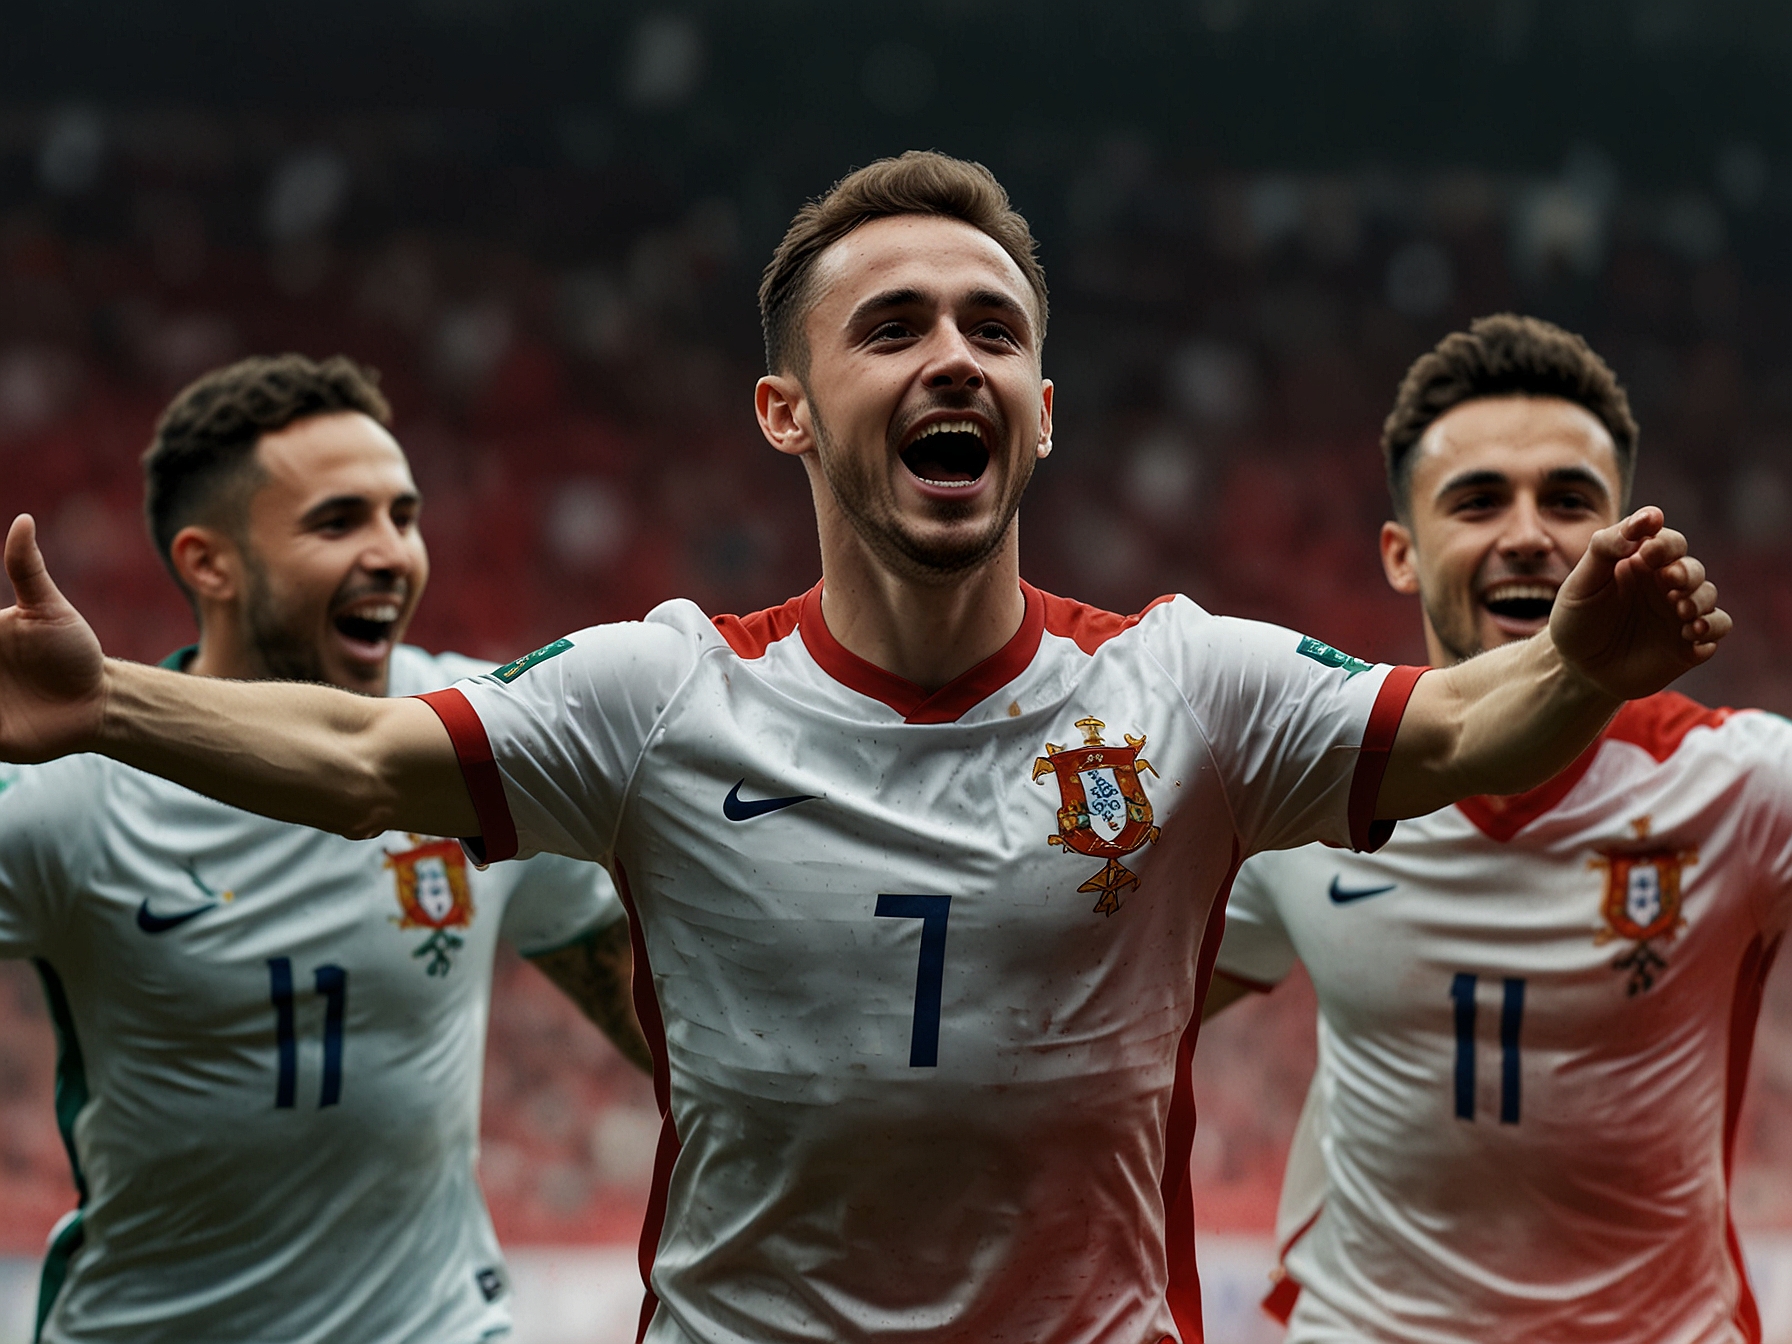 Diogo Jota wearing Portugal’s national team jersey, celebrating a goal with teammates, emphasizing his vital role in Portugal’s Euro 2024 campaign.